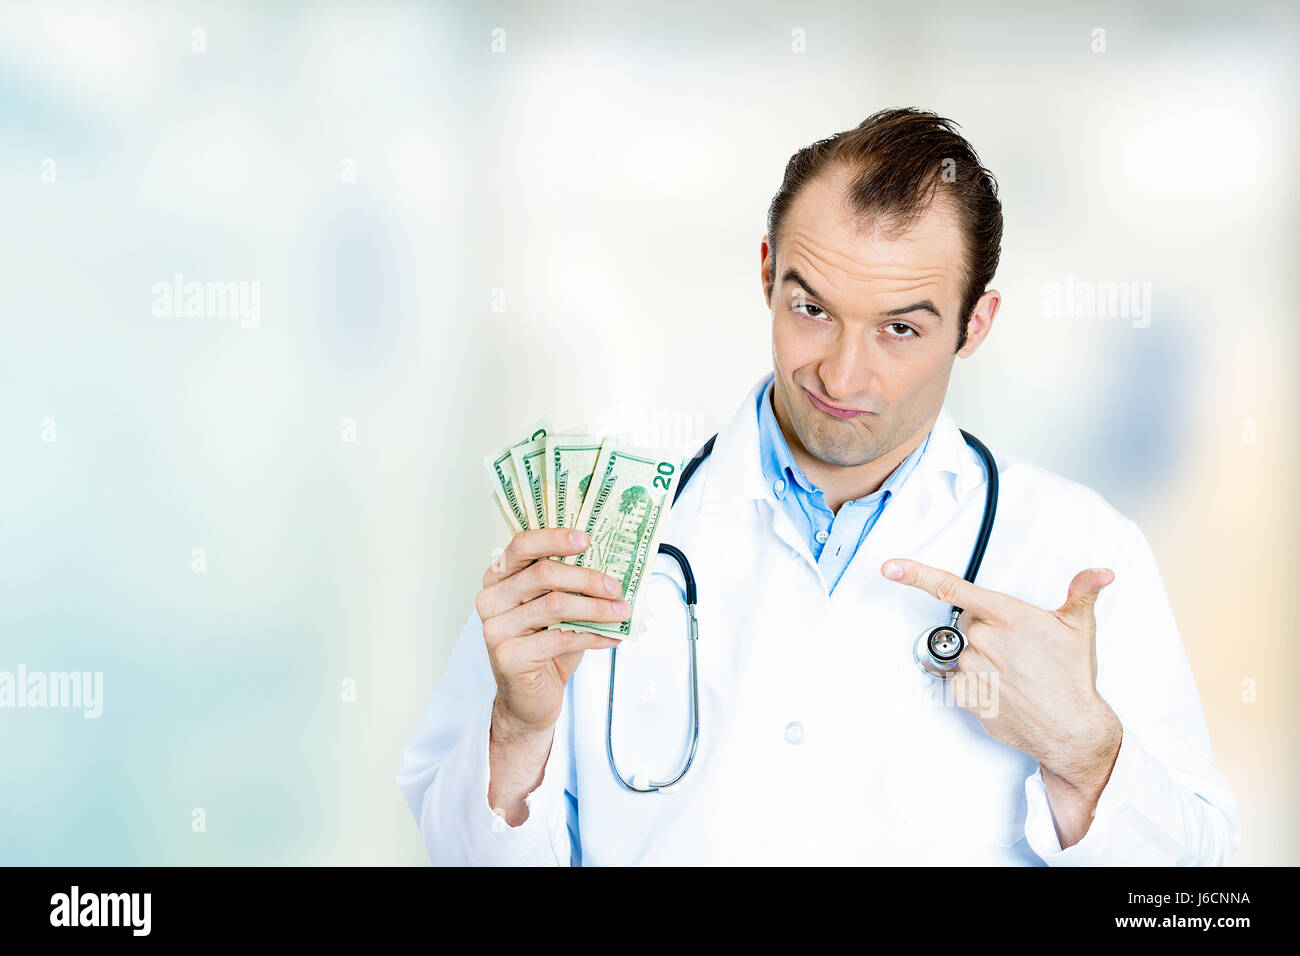 Healthcare financial system concept. Greedy miserly health care professional, male doctor holding money dollar bills standing in hospital clinic hallw Stock Photo